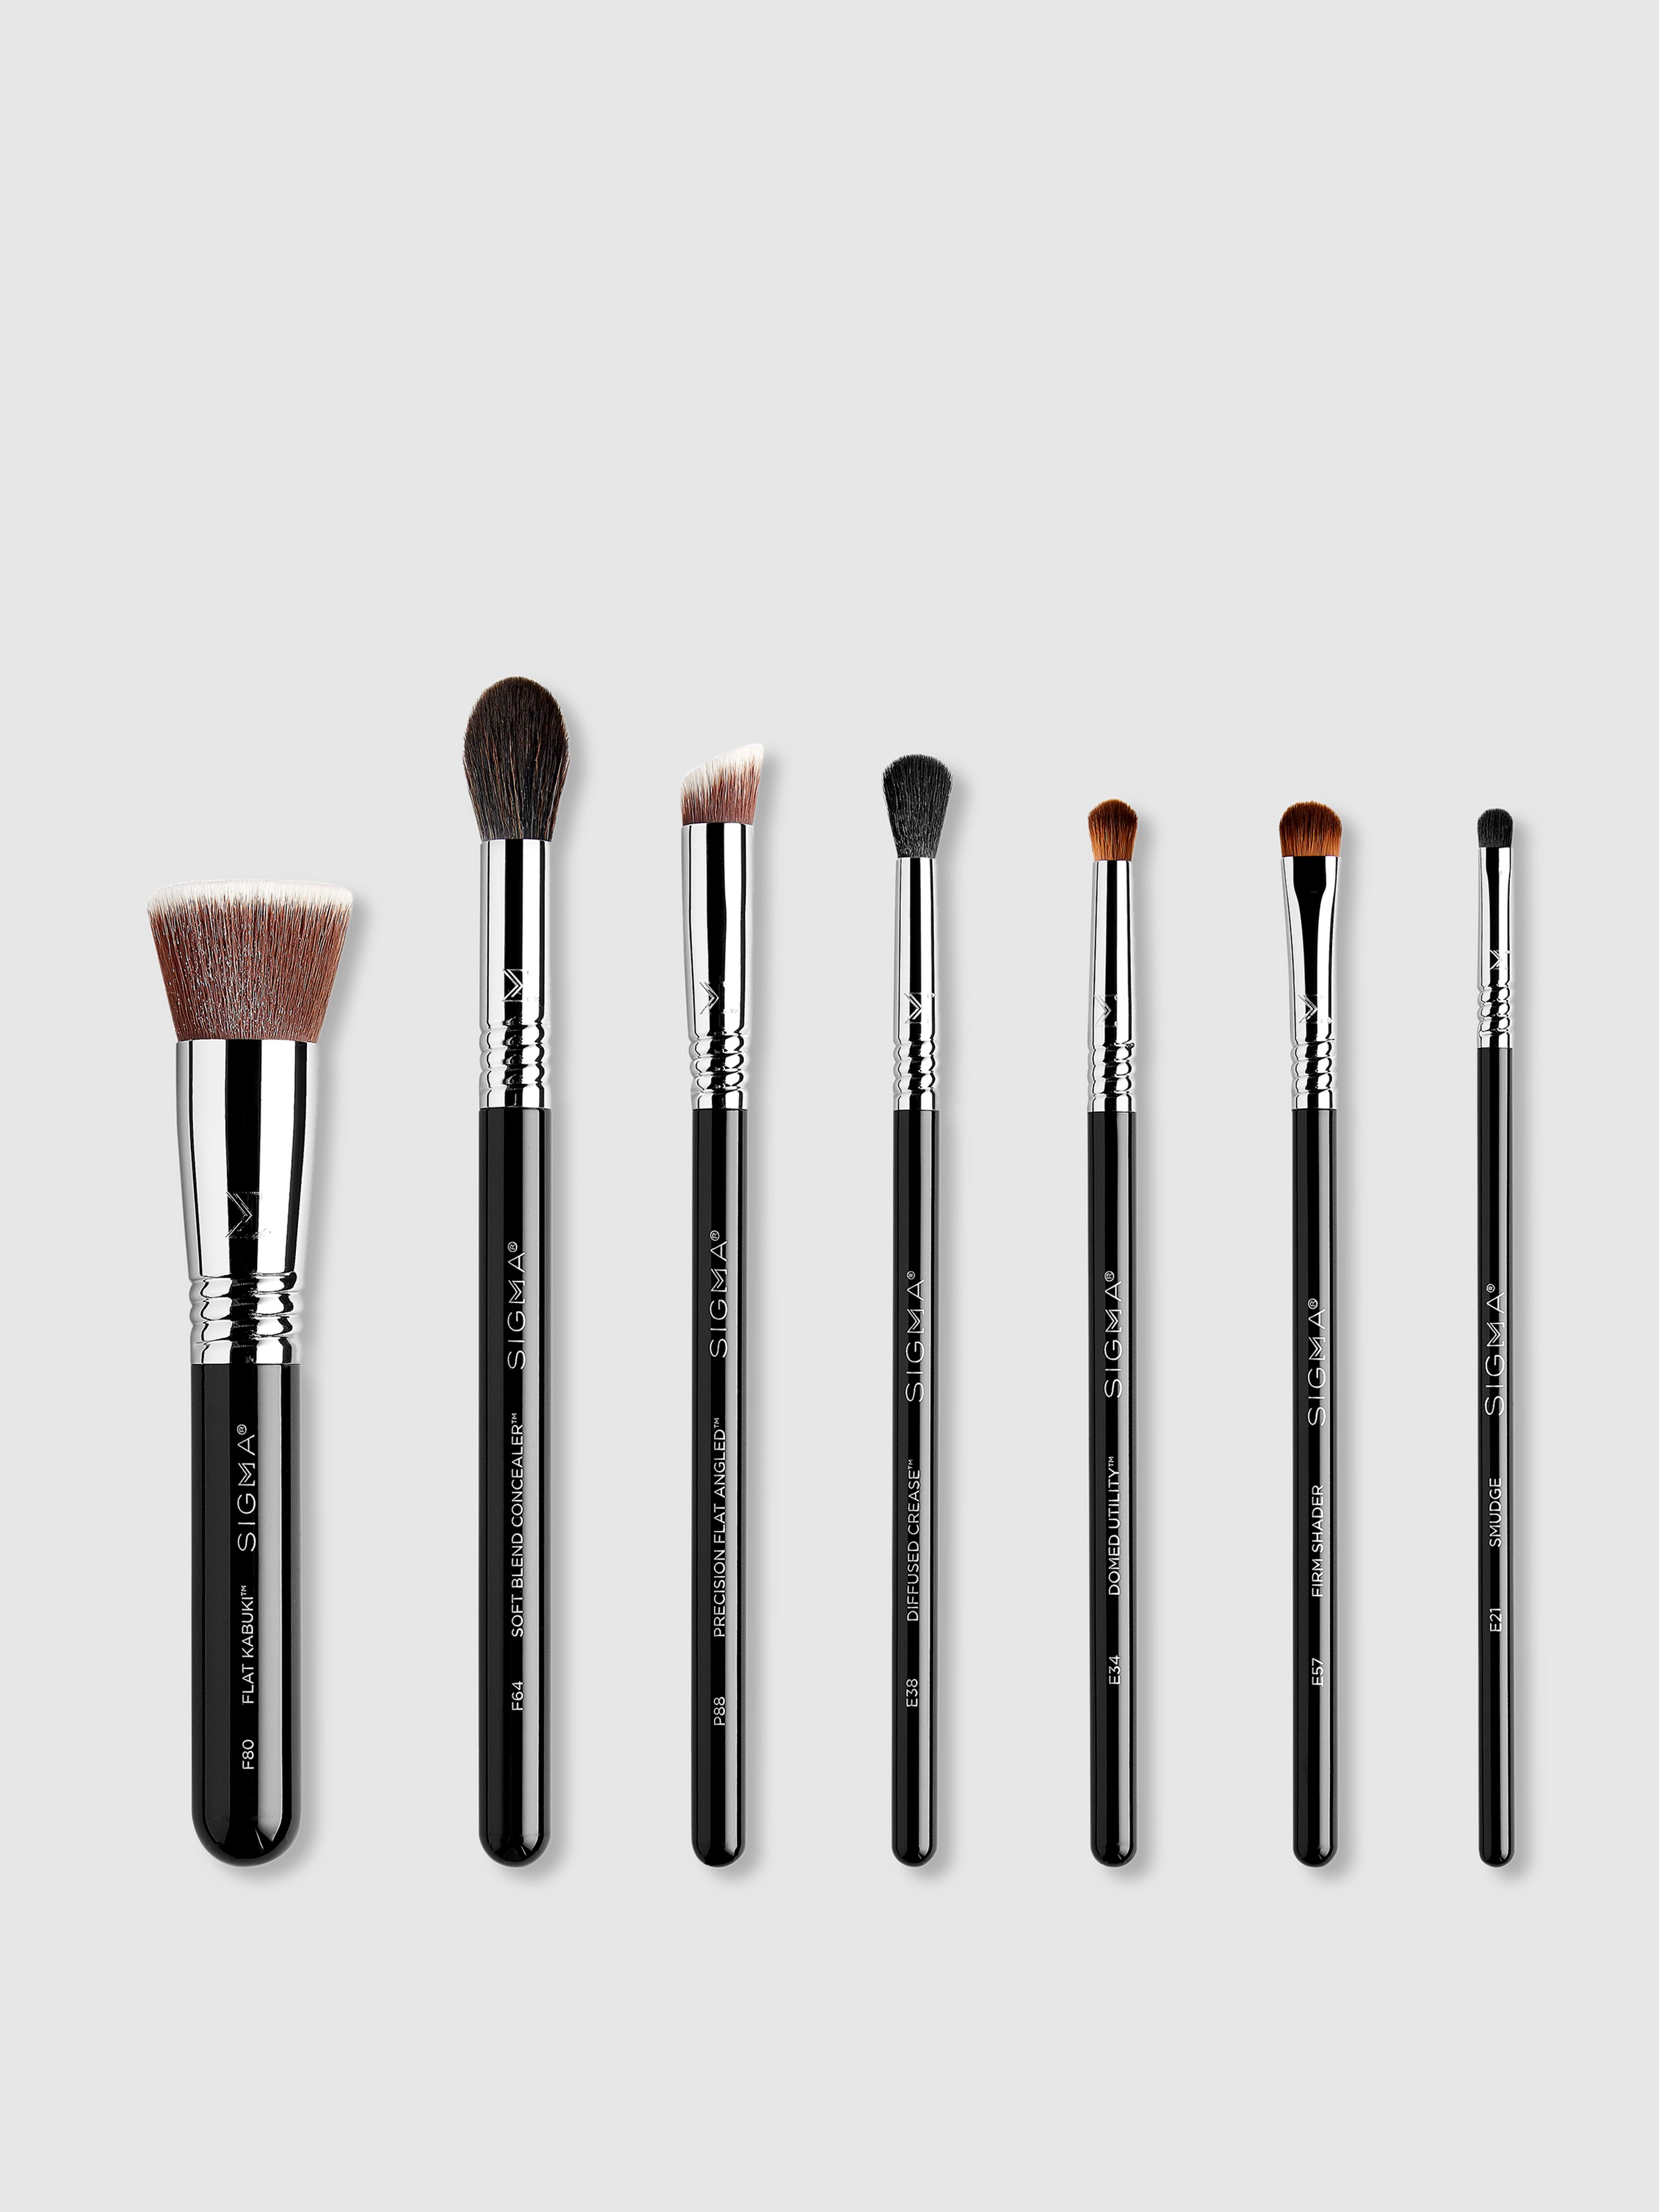 Sigma Beauty Best Of Sigma Brush Set In White